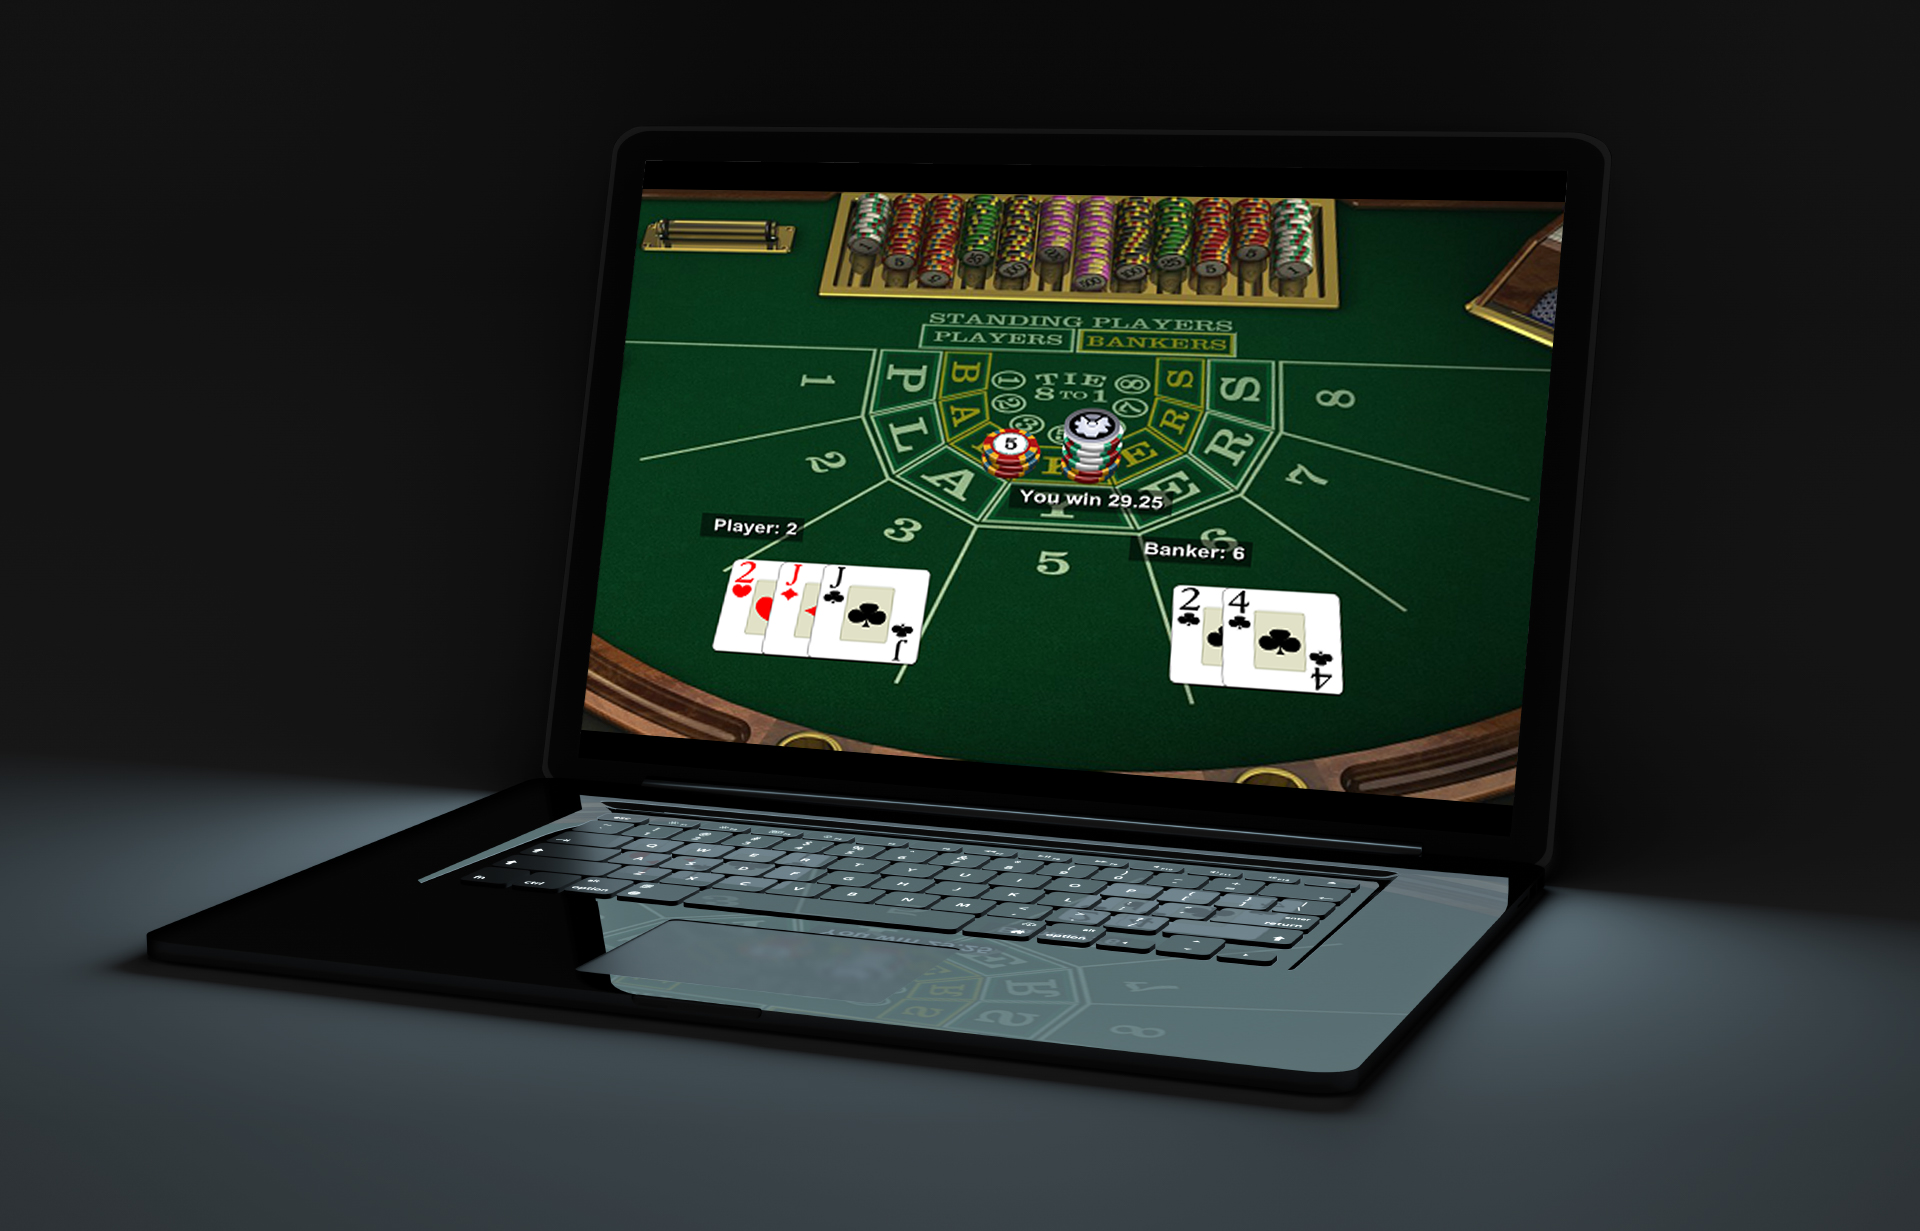 Follow baccarat strategy for frequent winnings.